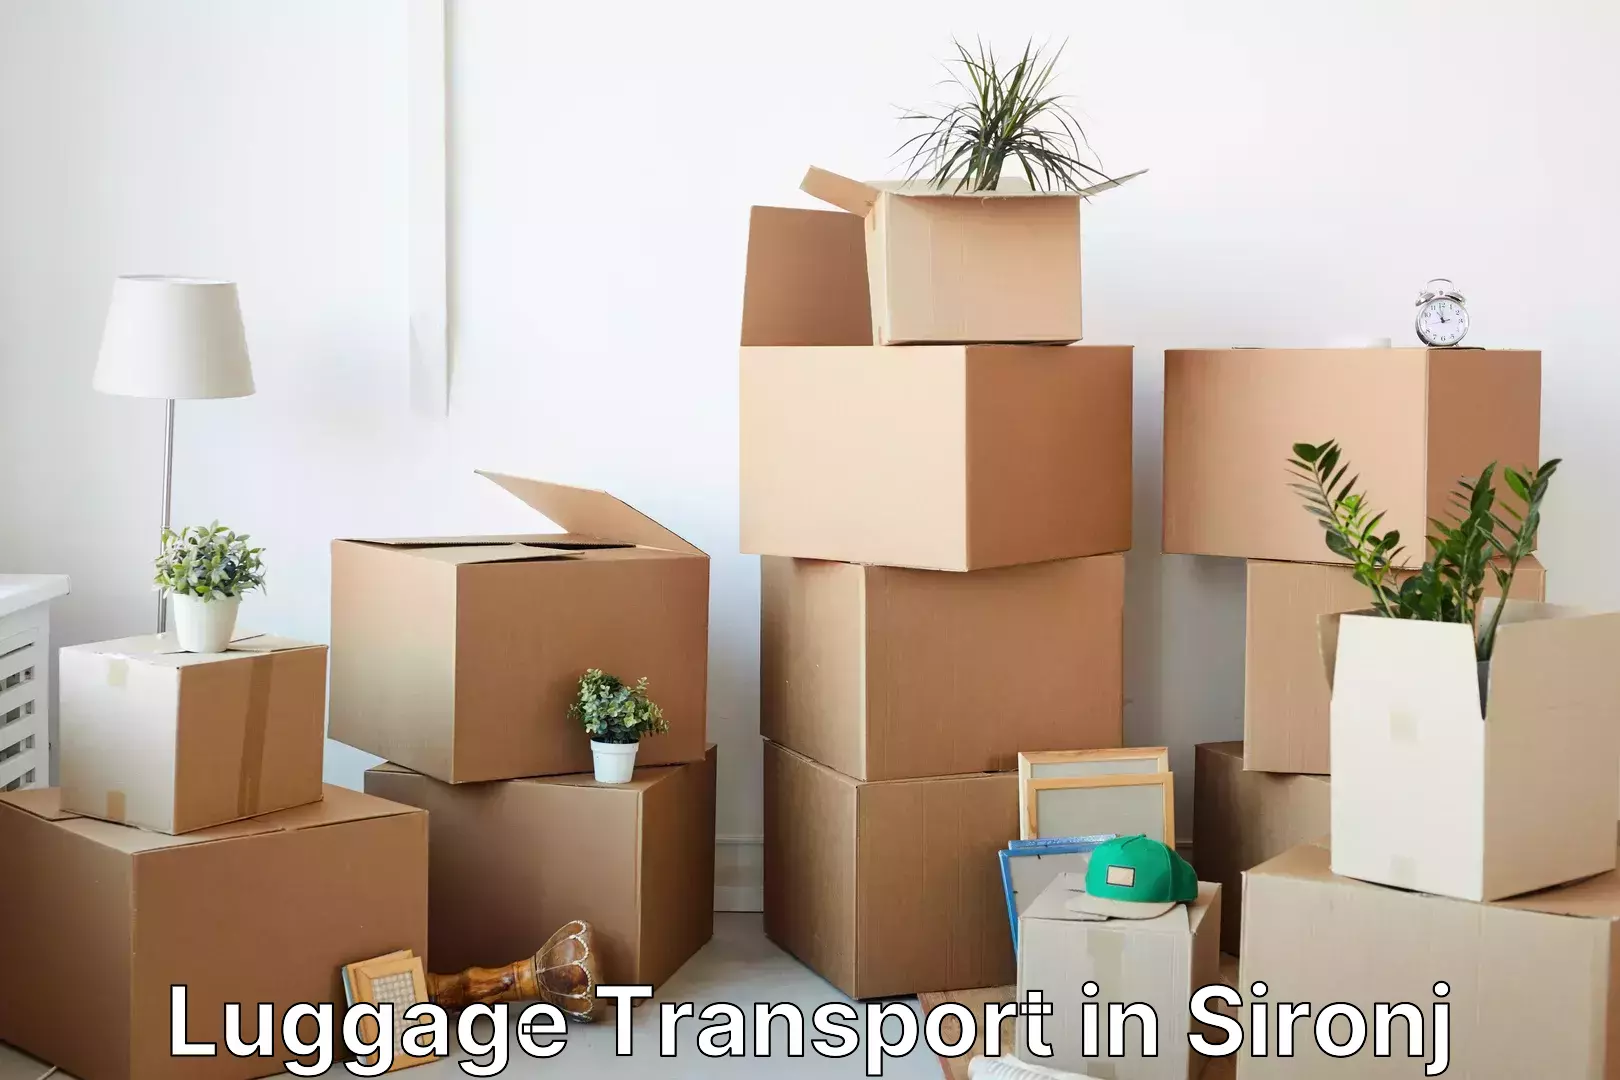 Simplified luggage transport in Sironj